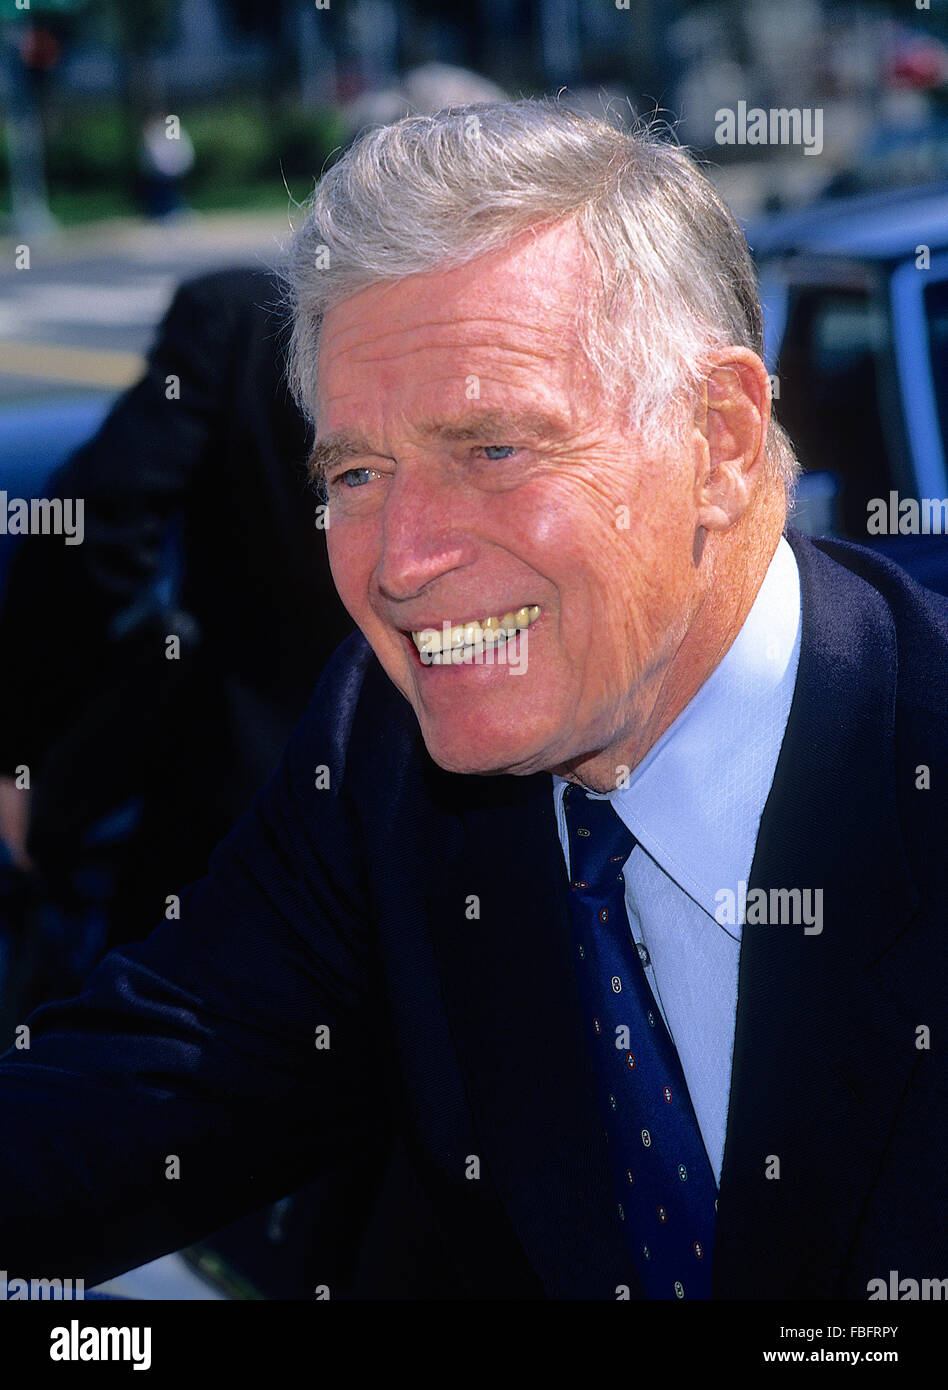 Washington, DC., USA, 18th May, 1997 Charlton Heston arrives at the FOX TV network studio's in Washington DC. for his appearance on the Sunday morning talk show 'FOX News Sunday with Chris Wallace' Charlton Heston  was an American actor and political activist. As a Hollywood star he appeared in 100 films over the course of 60 years. He is best known for his roles in The Ten Commandments (1956); Ben-Hur, for which he won the Academy Award for Best Actor (1959), El Cid (1961), and Planet of the Apes (1968). Credit: Mark Reinstein Stock Photo